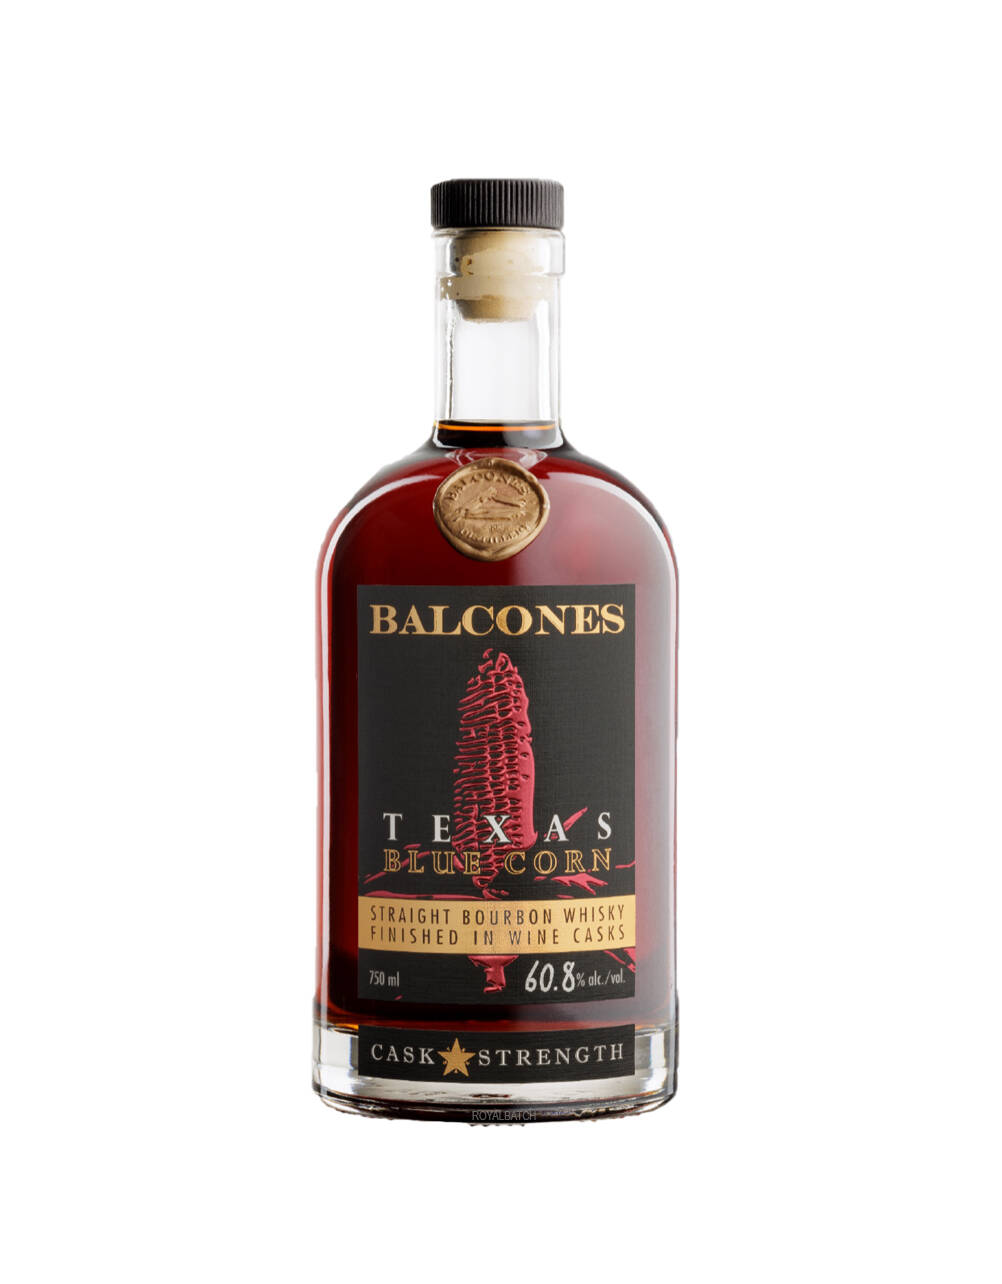 Balcones Texas Blue Corn finished in Wine casks Bourbon Whisky